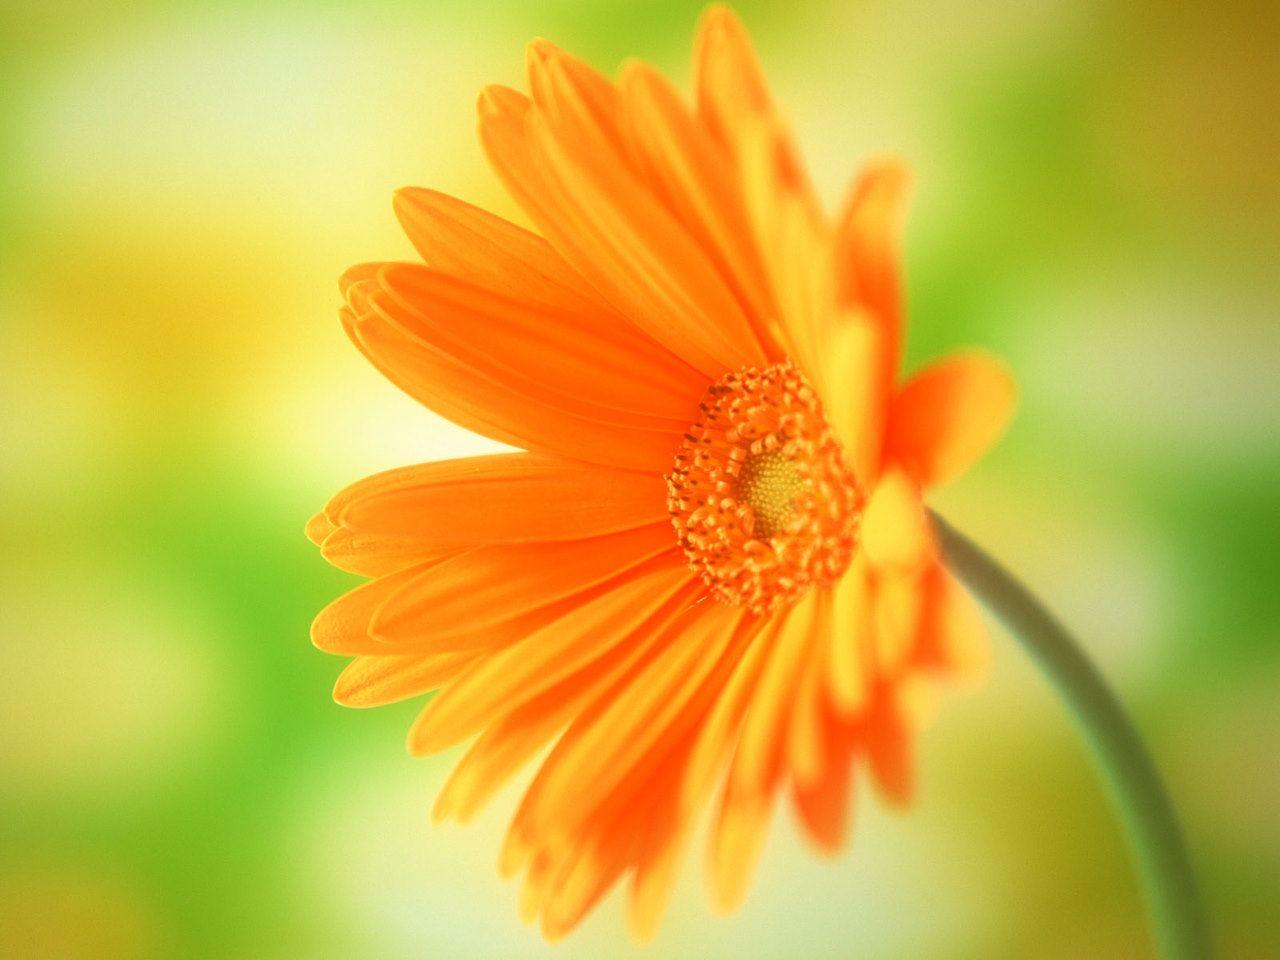 LATEST WALLPAPERS: Flowers Wallpaper, Flowers Animated Wallpaper